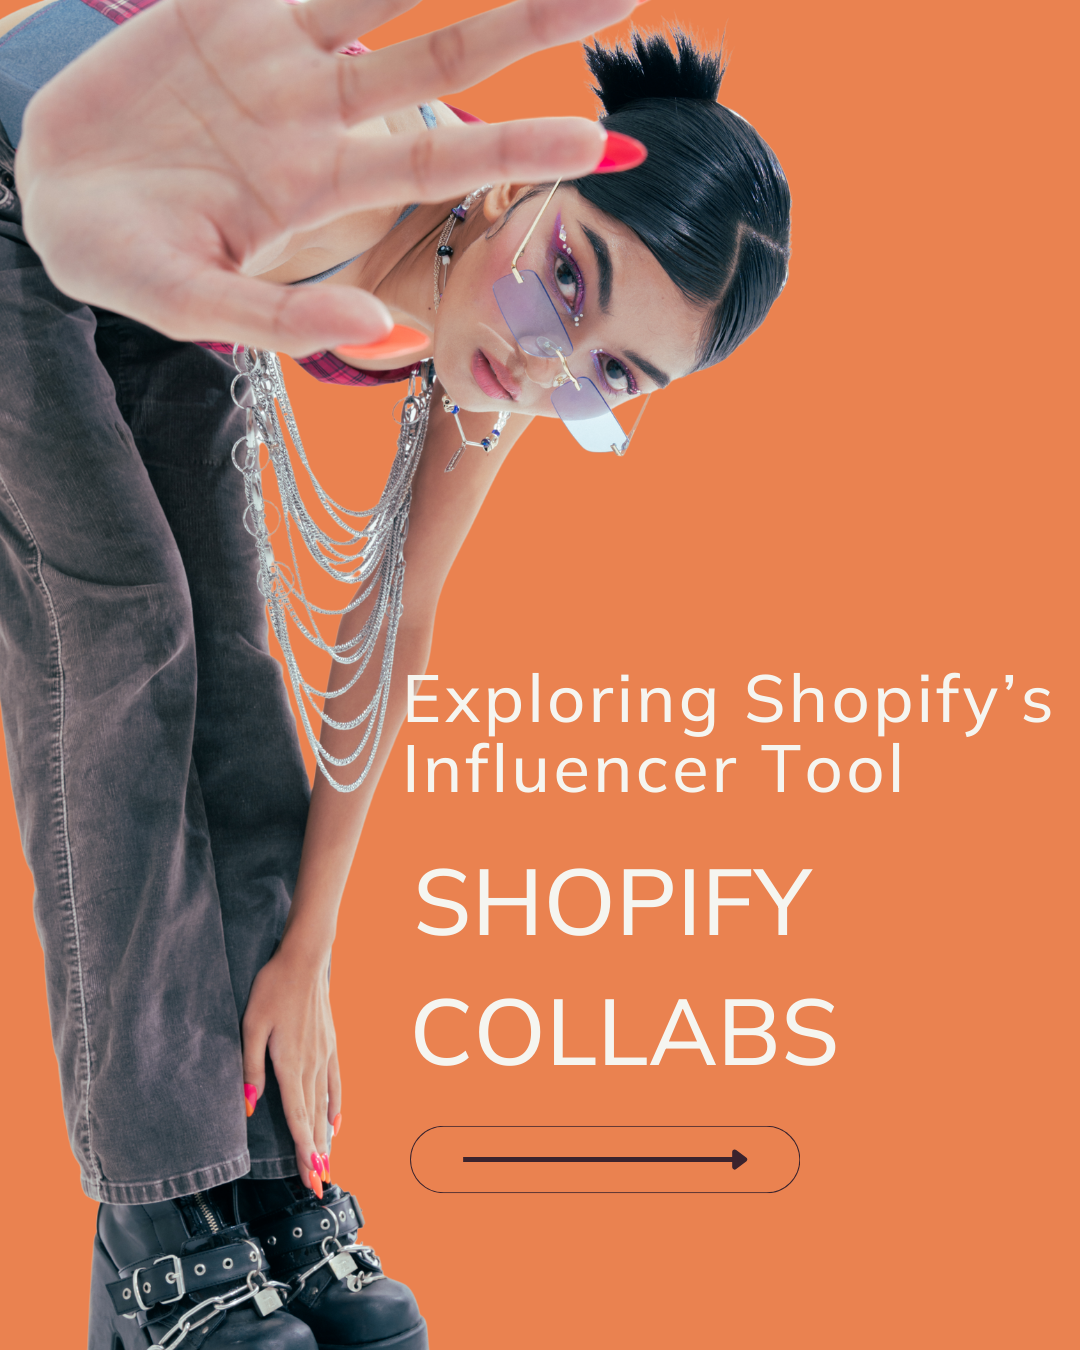 Exploring Shopify’s Influencer Tool. Shopify Collabs.